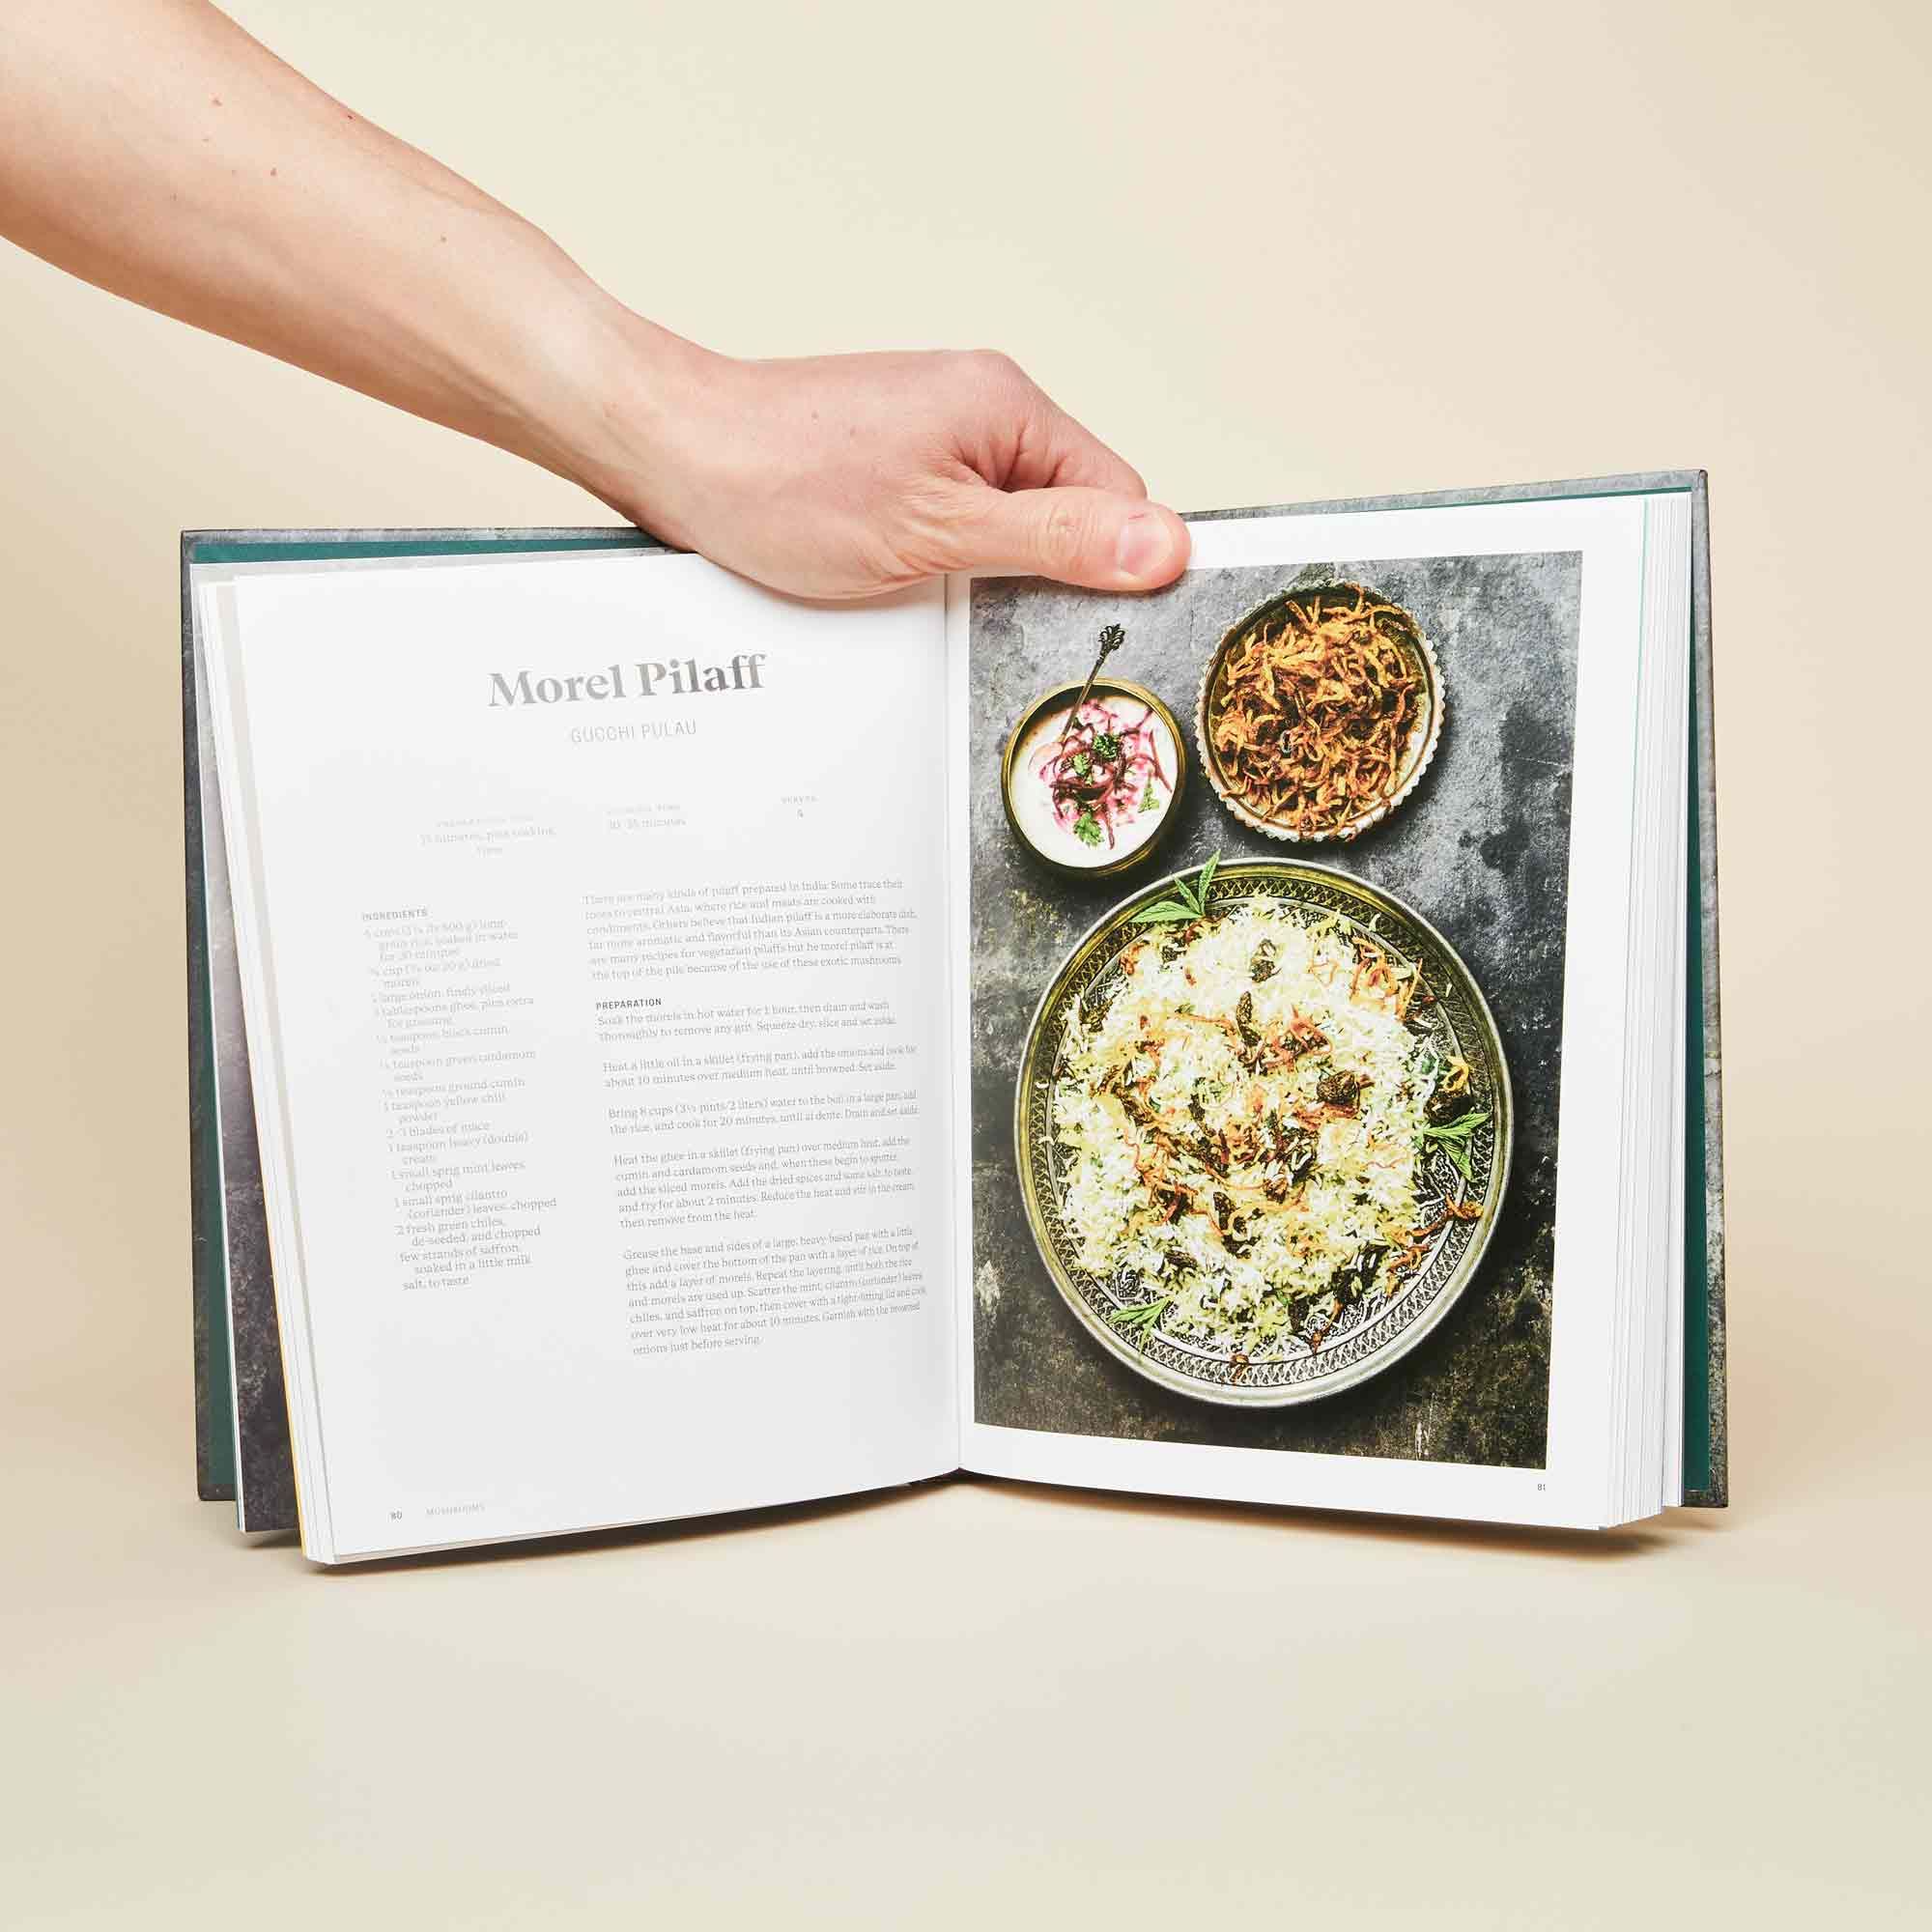 Two-page spread with a recipe for Morel Pilaff and photo of finished dish